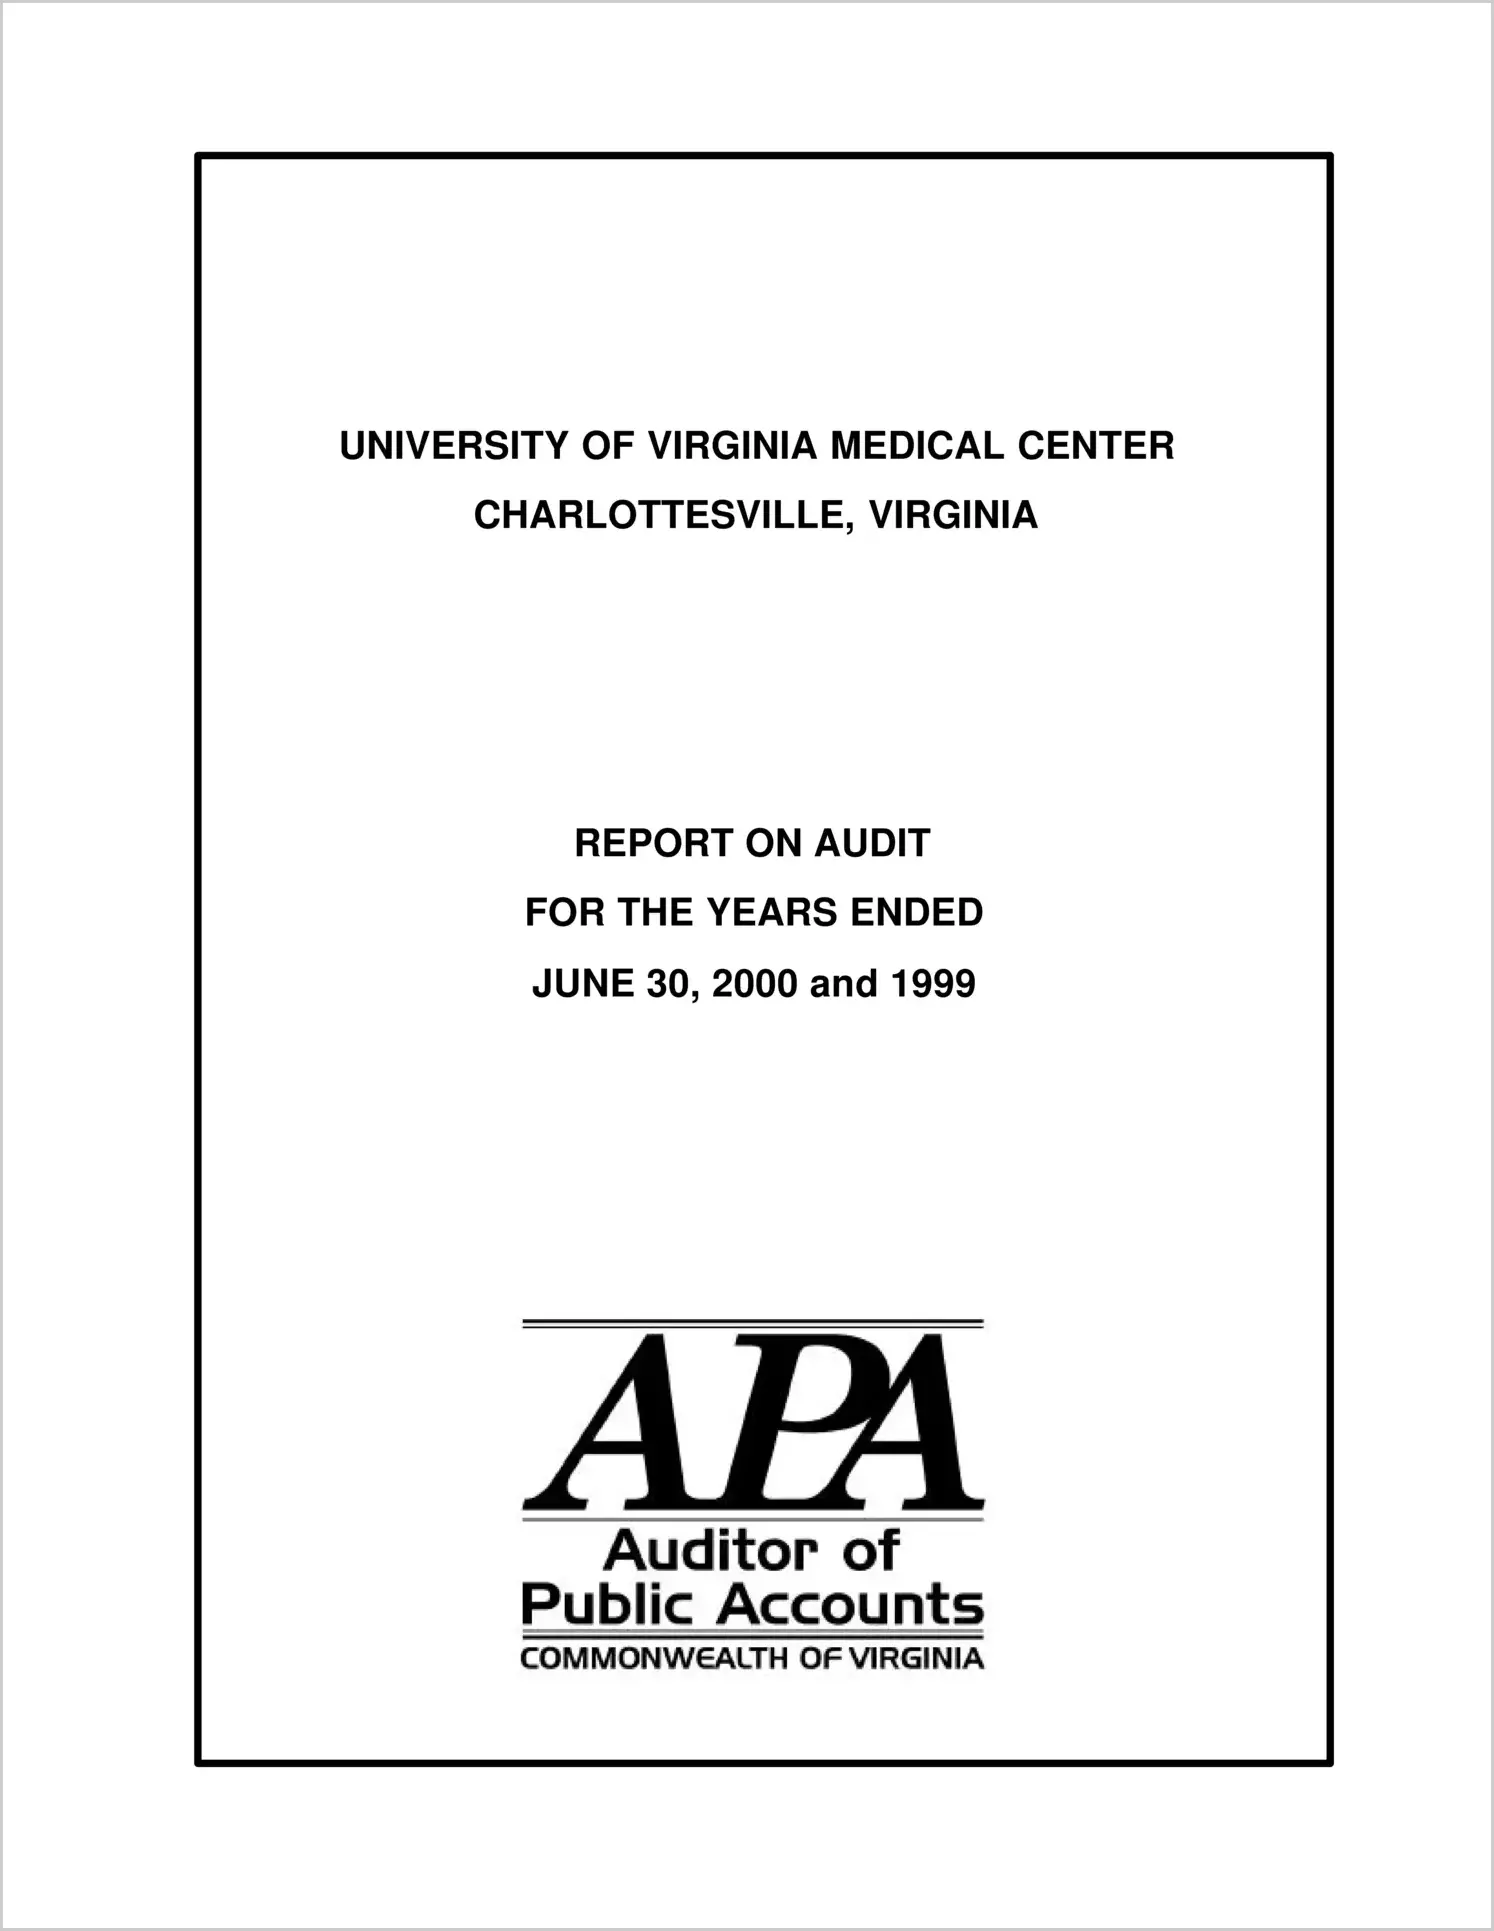 University of Virginia Medical Center for the year ended June 30, 2000